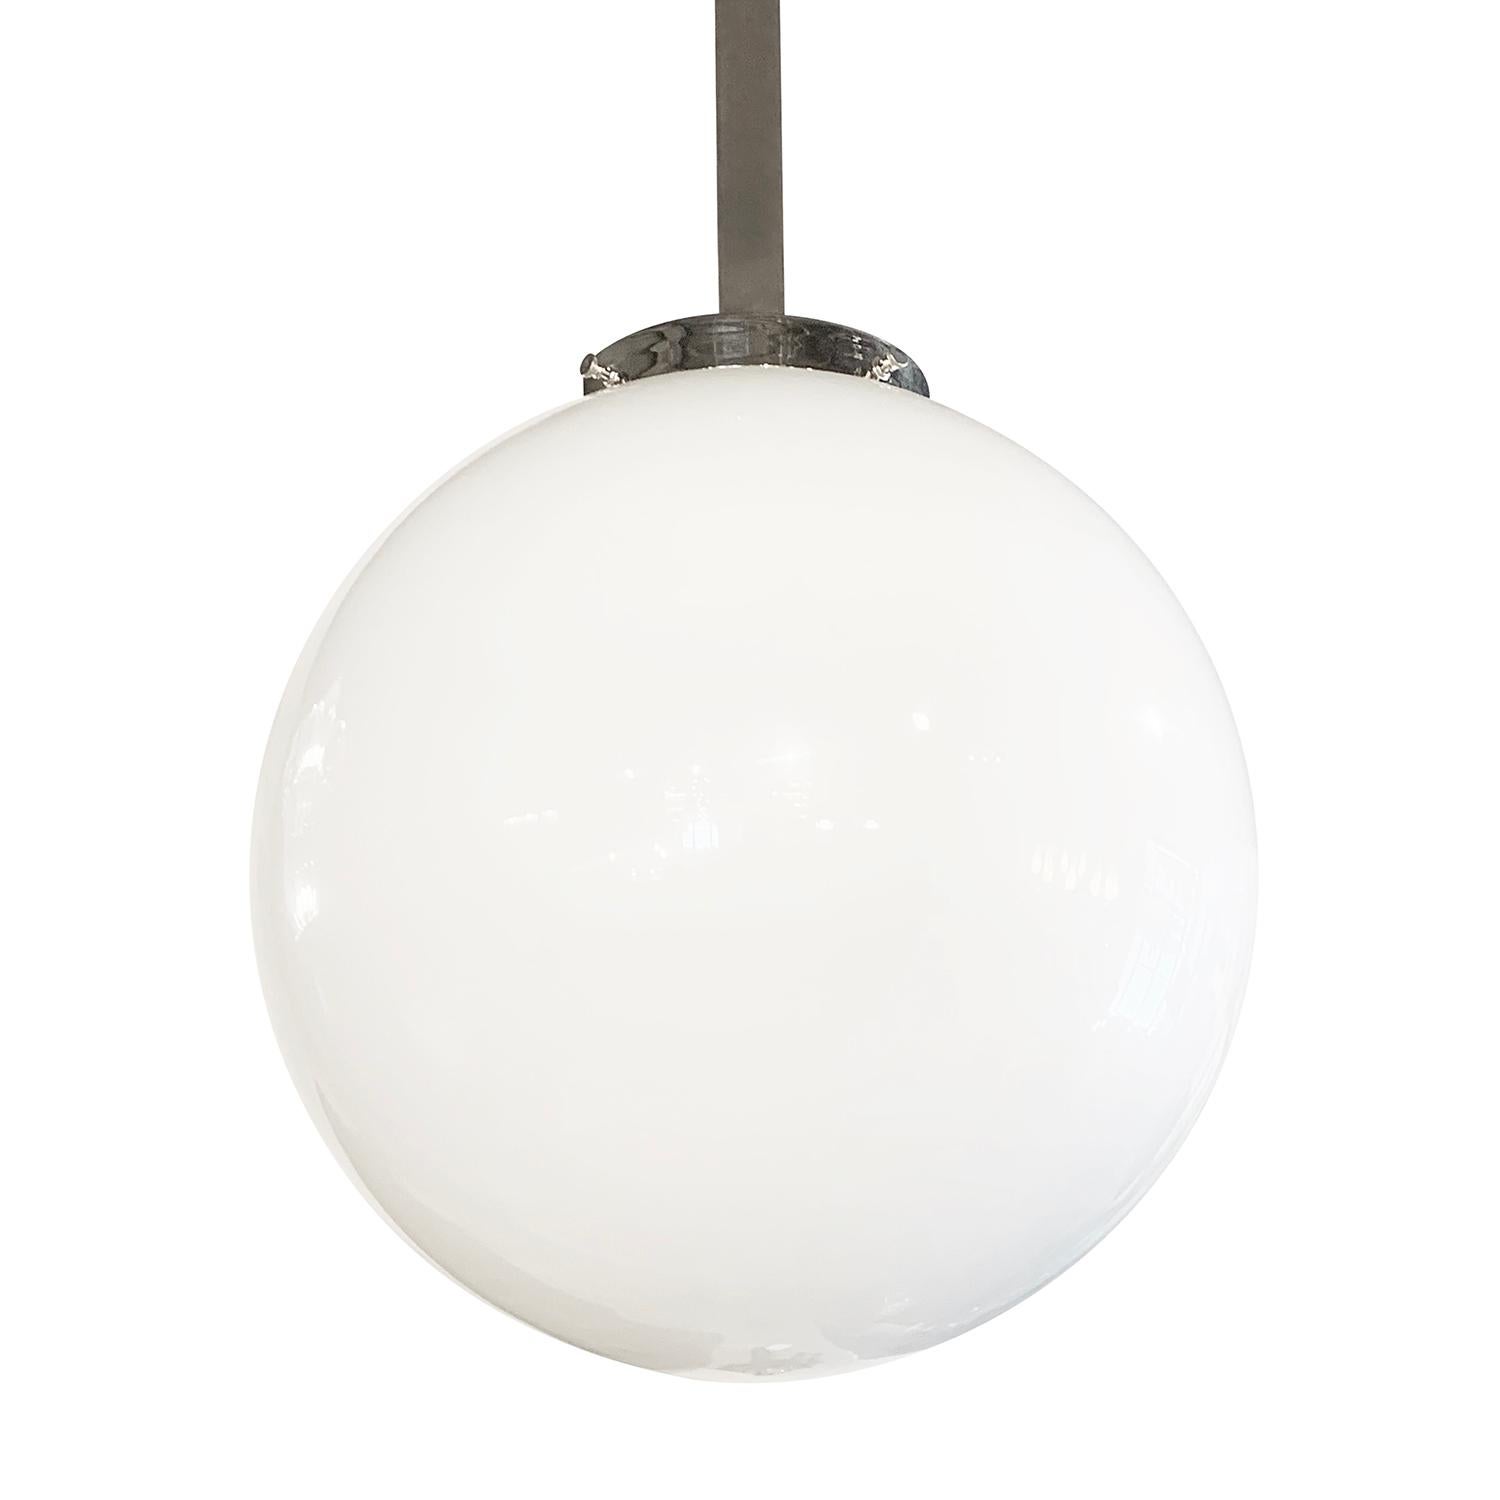 Hand-Crafted 20th Century French Minimalist Glass Pendant, Round Nickel Ceiling Light Fixture